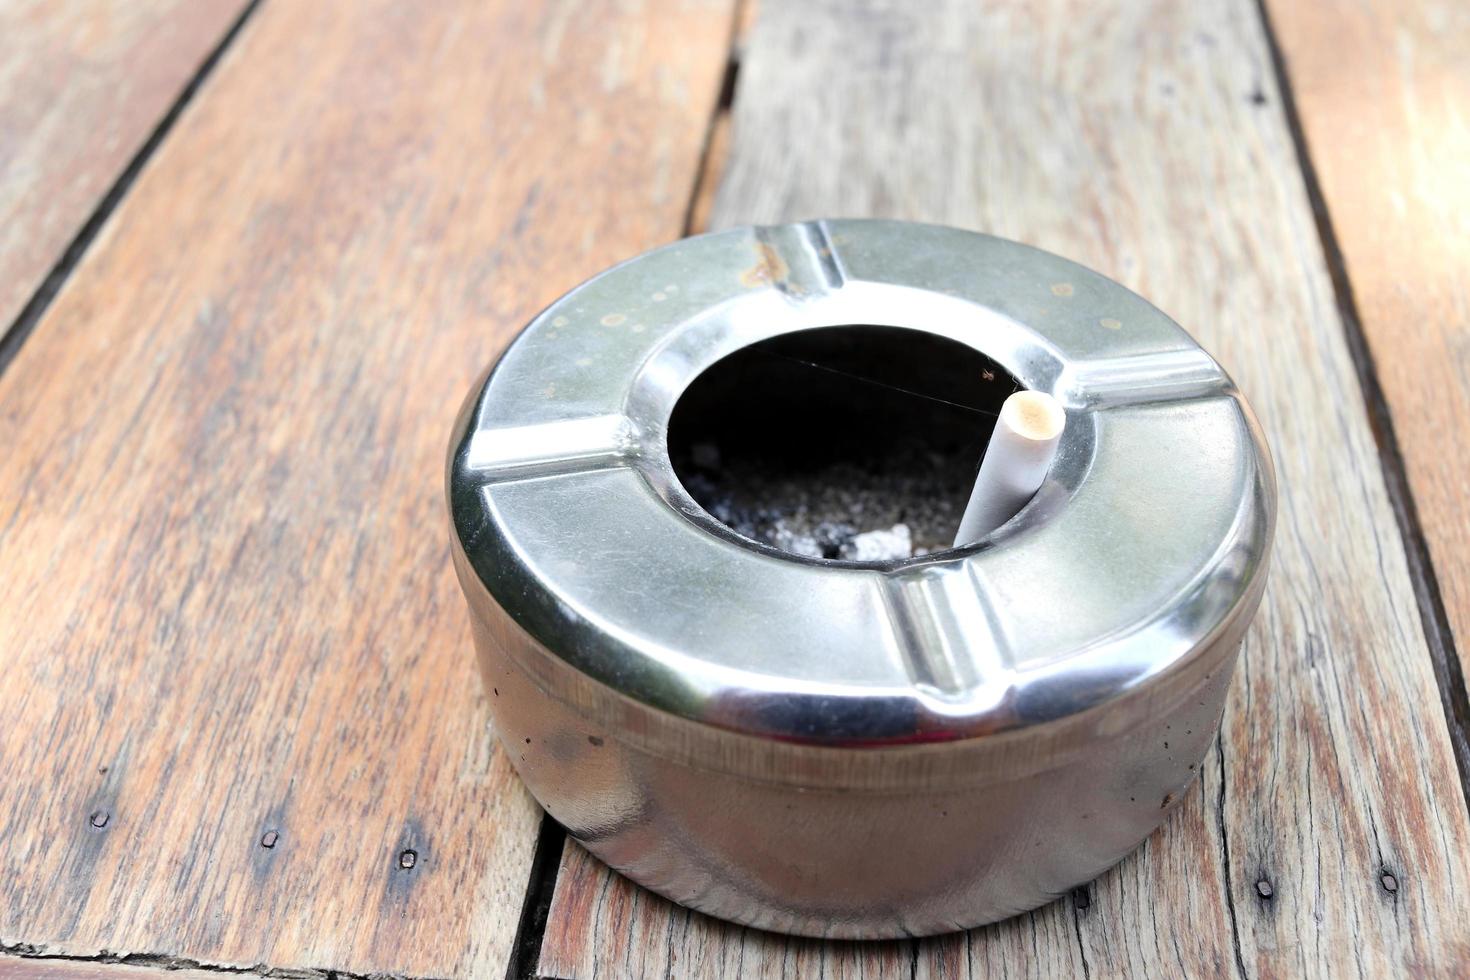 Round shape stainless ashtray is on light brown wooden floor and a cigarette in it, Thailand. photo